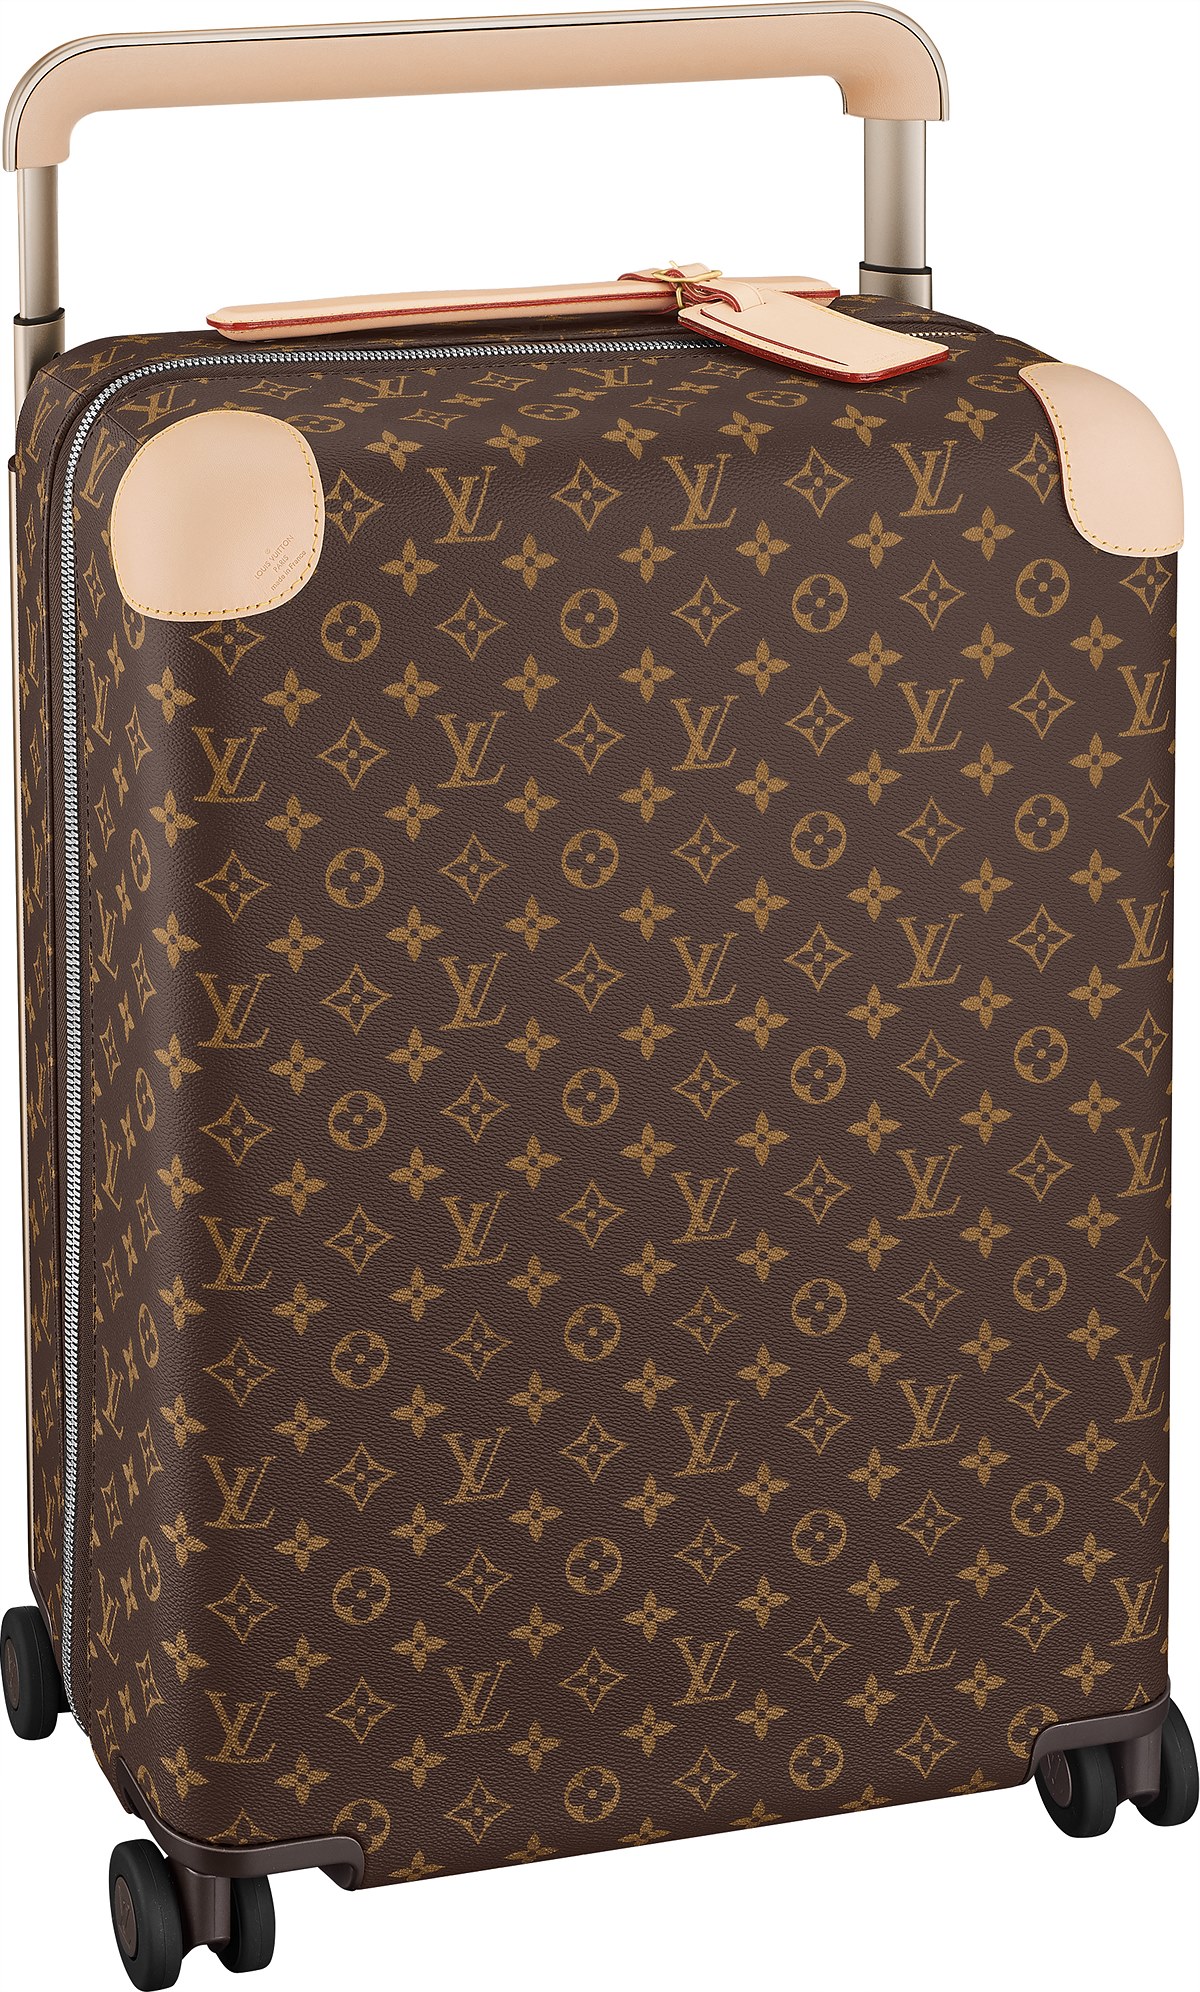 LV_The Rolling Luggage_M23203